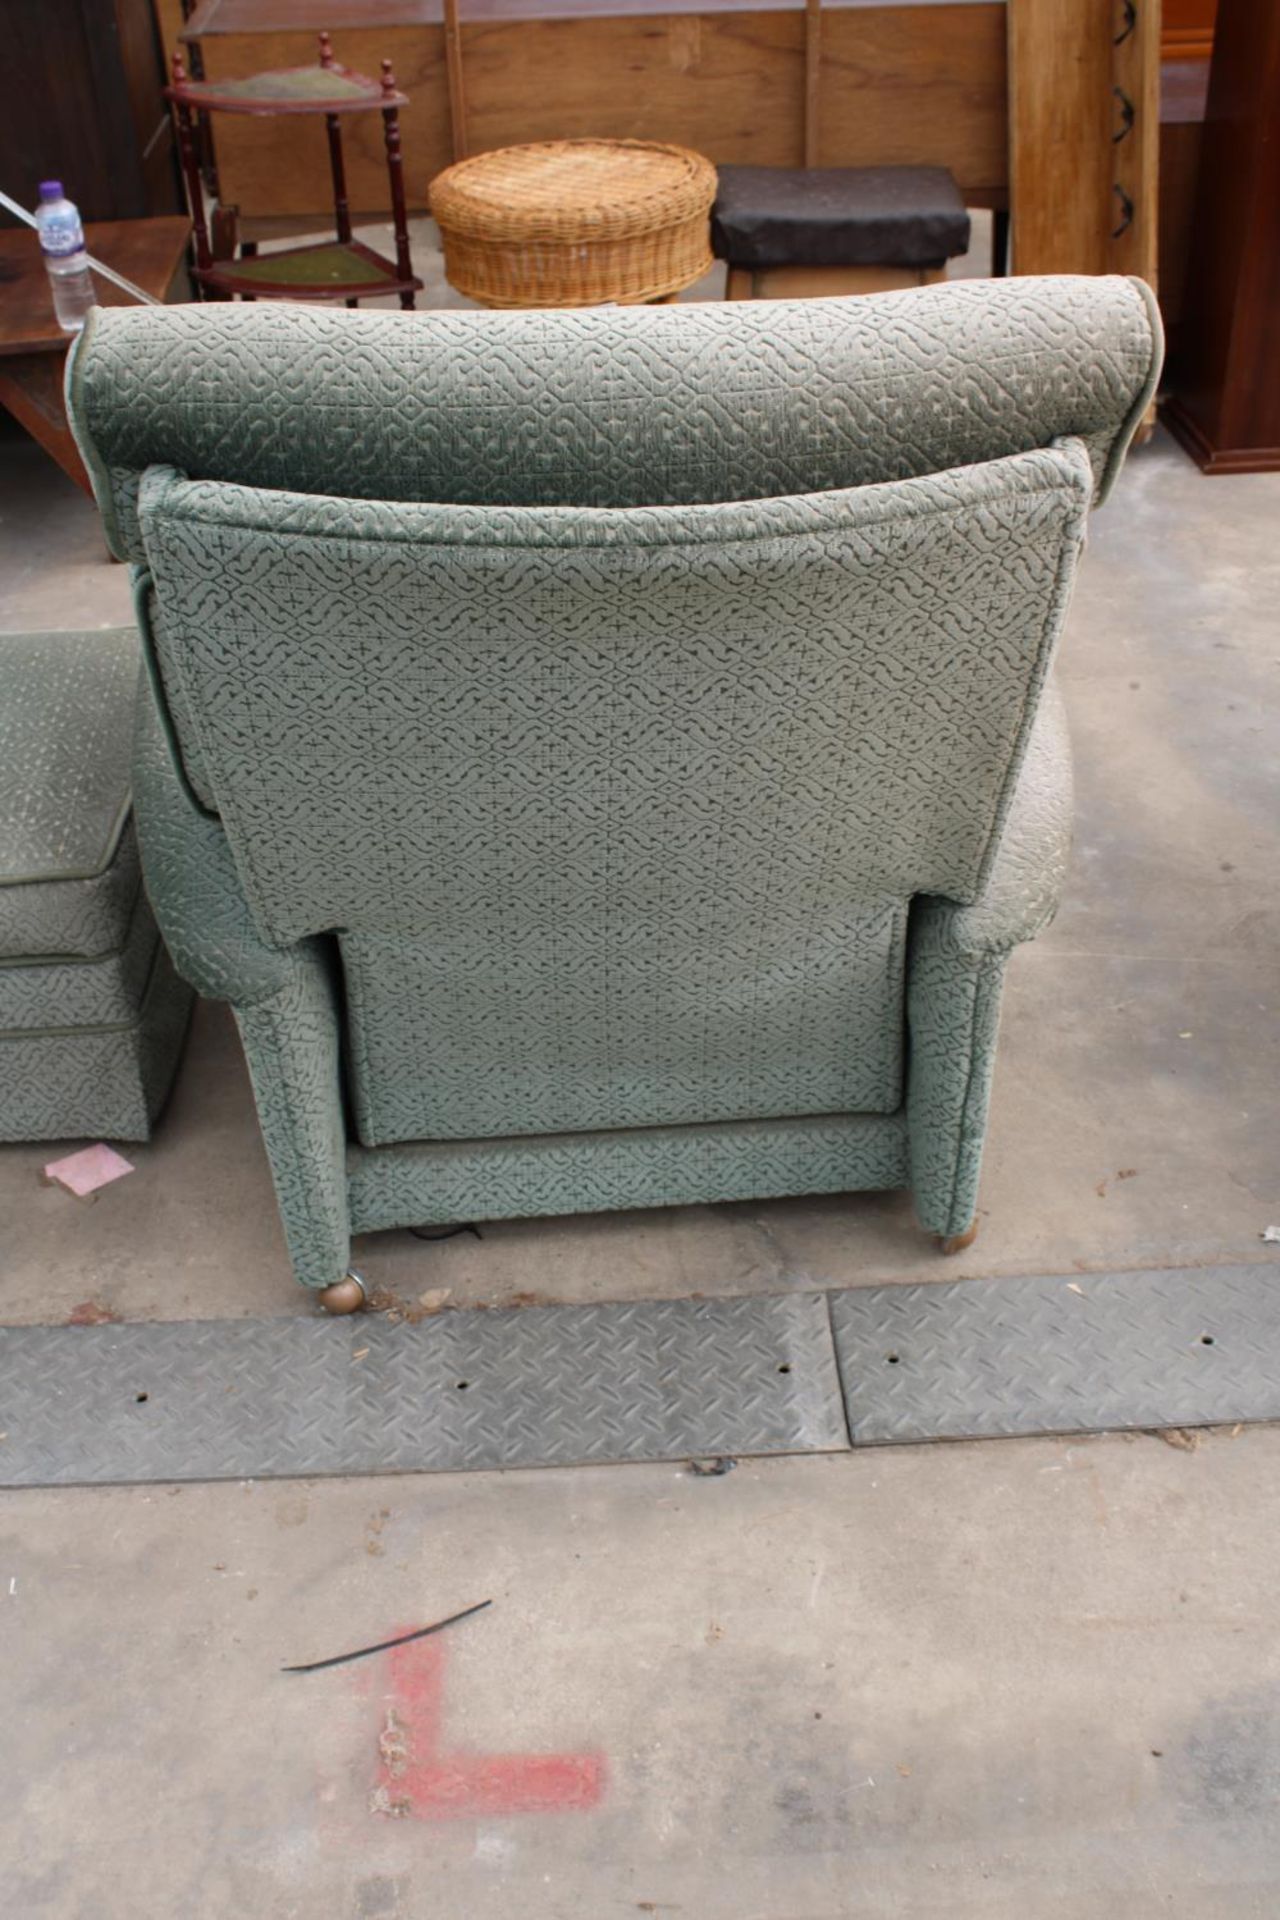 A PARKER KNOLL RECLINER CHAIR, MODEL NO. N30 - Image 3 of 3